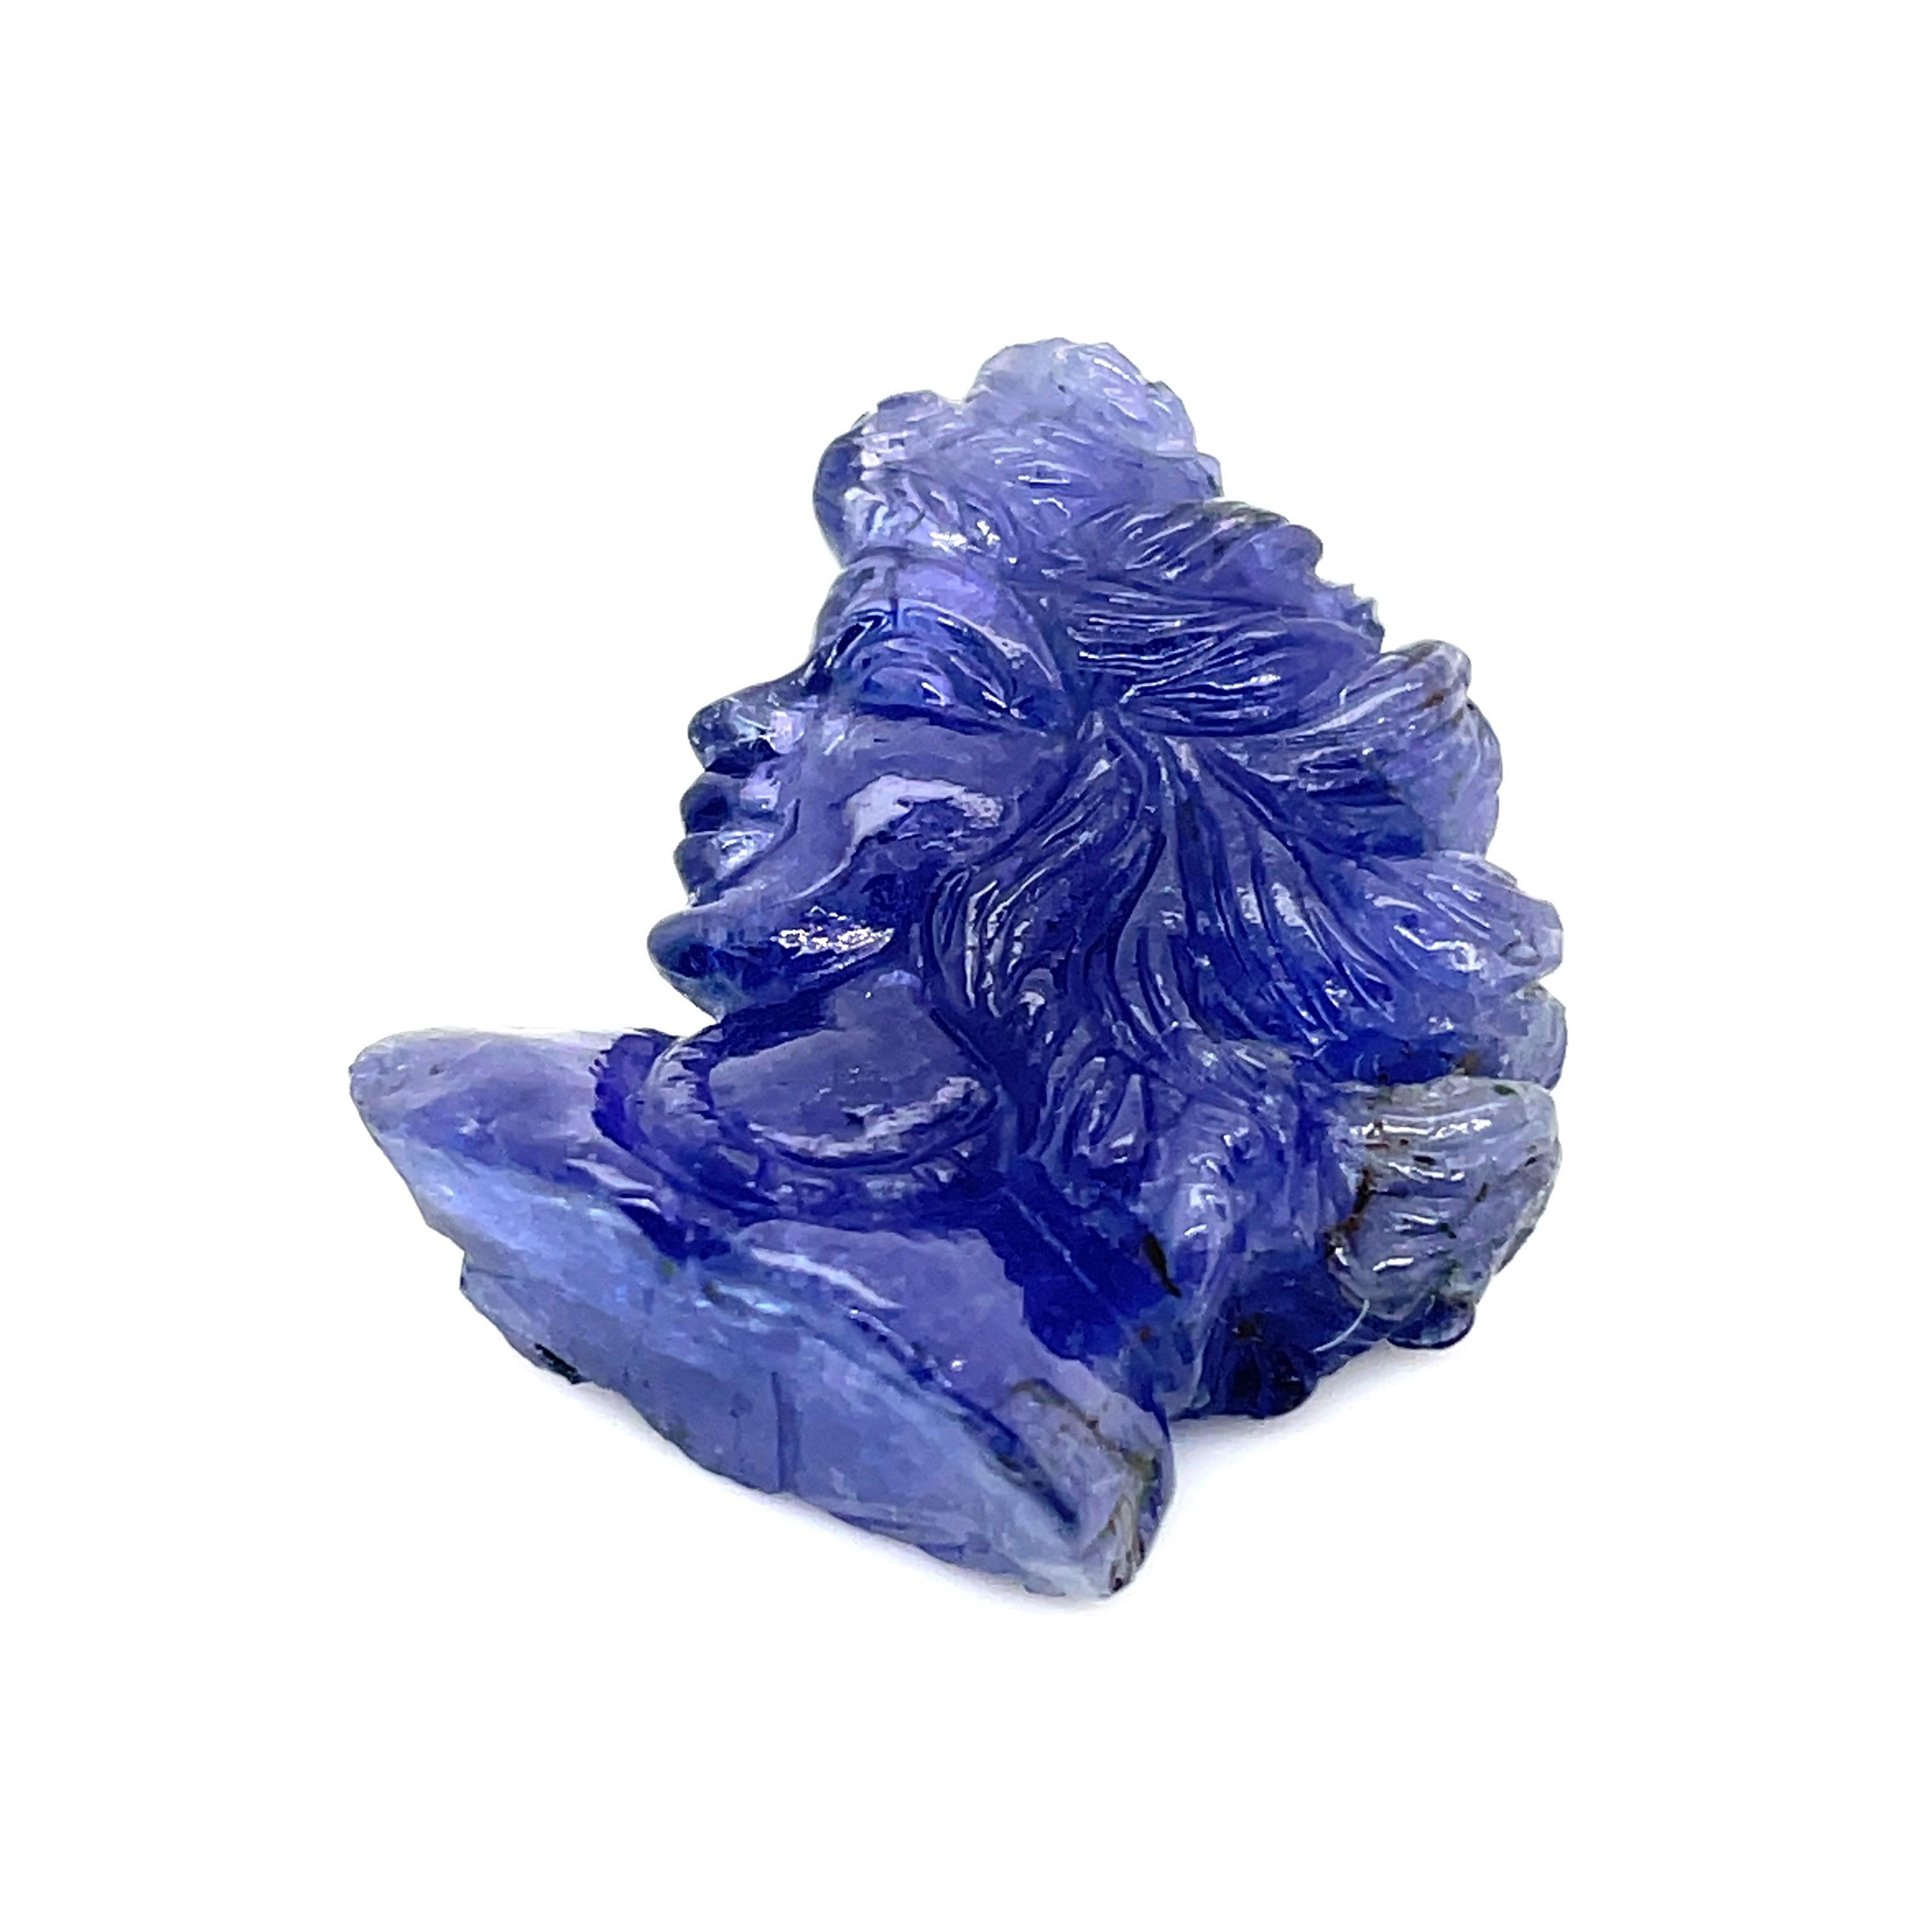 This breathtaking Carved Lady Tanzanite, a stunning gemstone weighing 49.76 cts, is adorned with intricate detailing that brings a graceful lady to life.

Everything about this gorgeous stone, from the strands of hair and delicate face to the